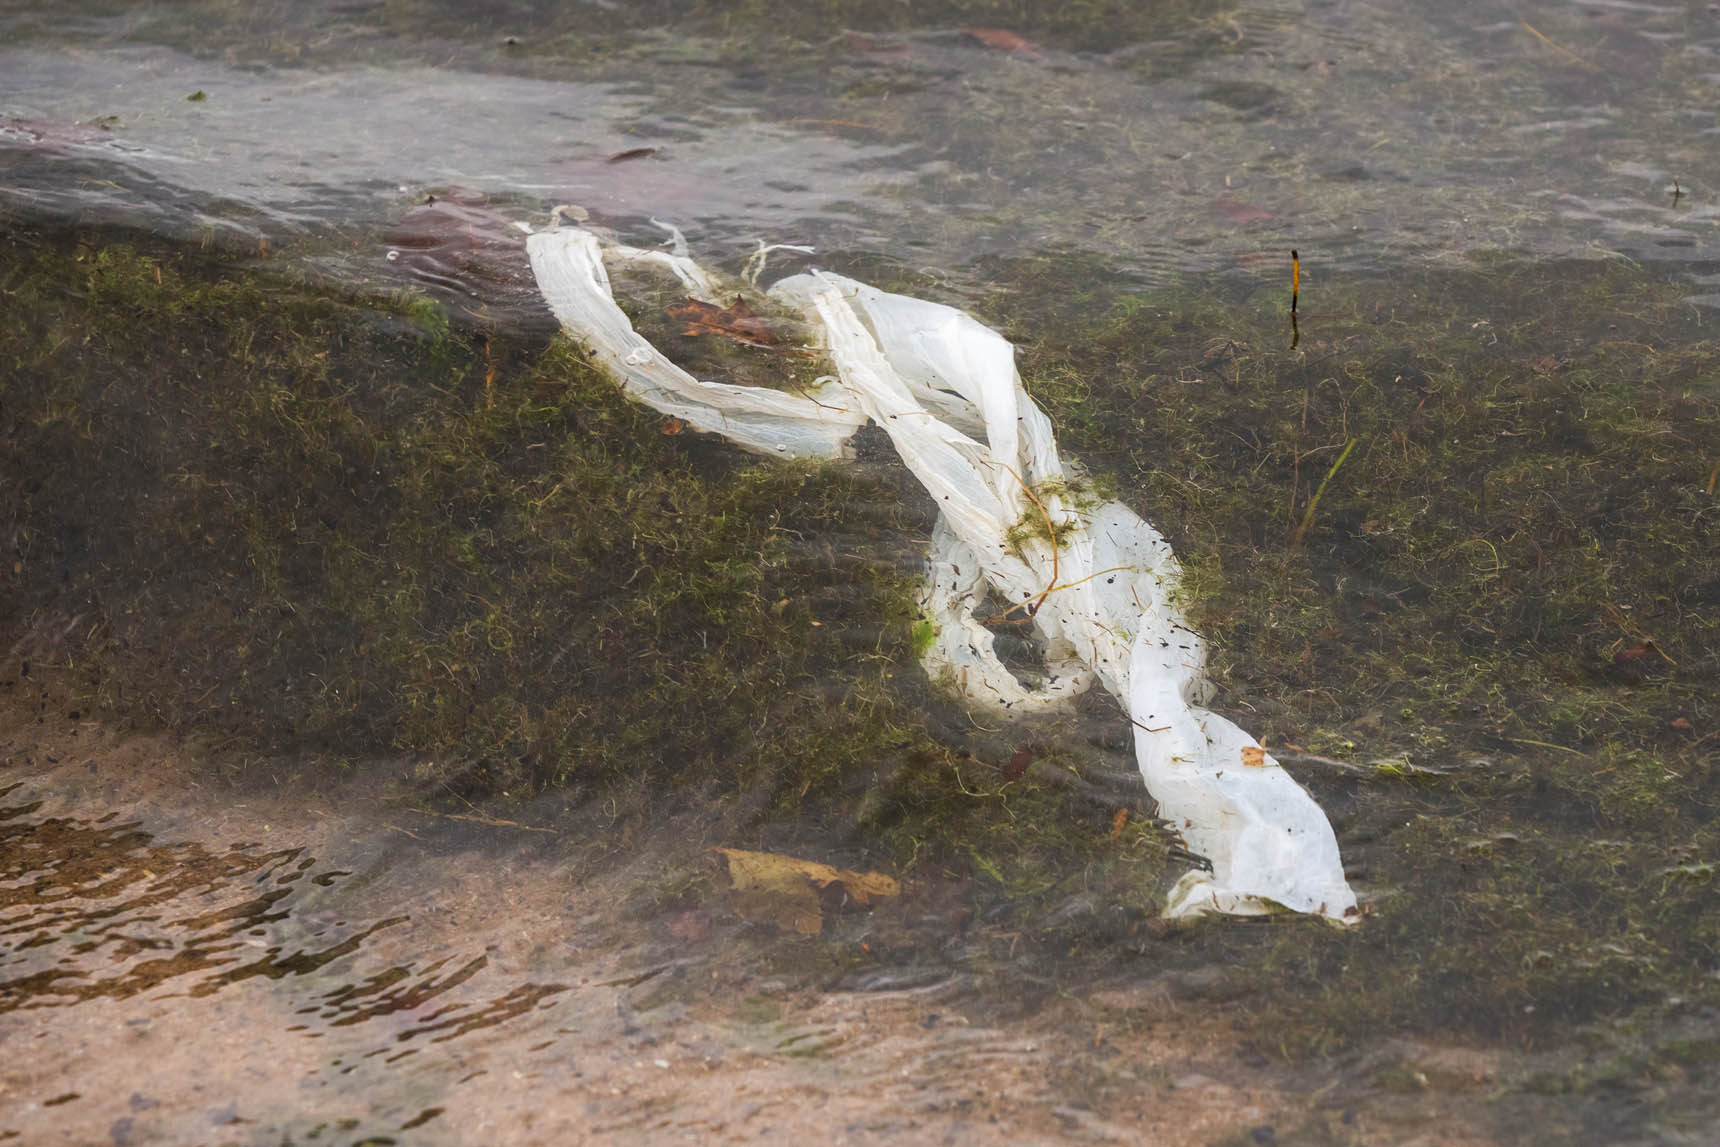  - Great Lakes Plastic Pollution - Photographs by Michael Courier